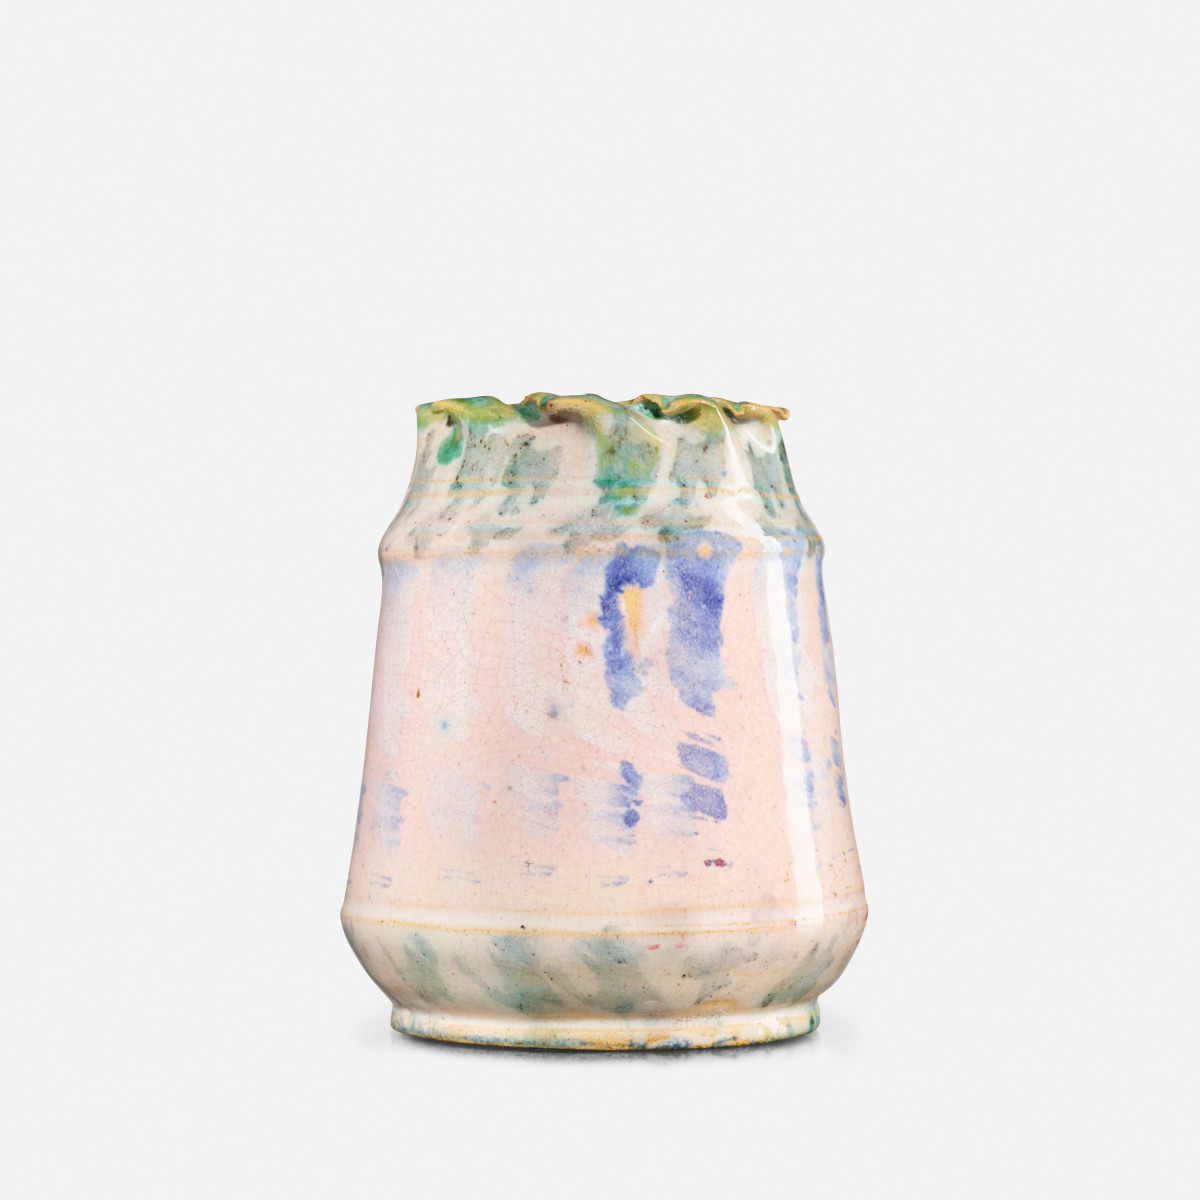 Ohr gave this vase a ruffled rim and an unusual pastel glaze, 1897-1900, 3-3/4” h × 3” dia; sold at Rago for $8,125.